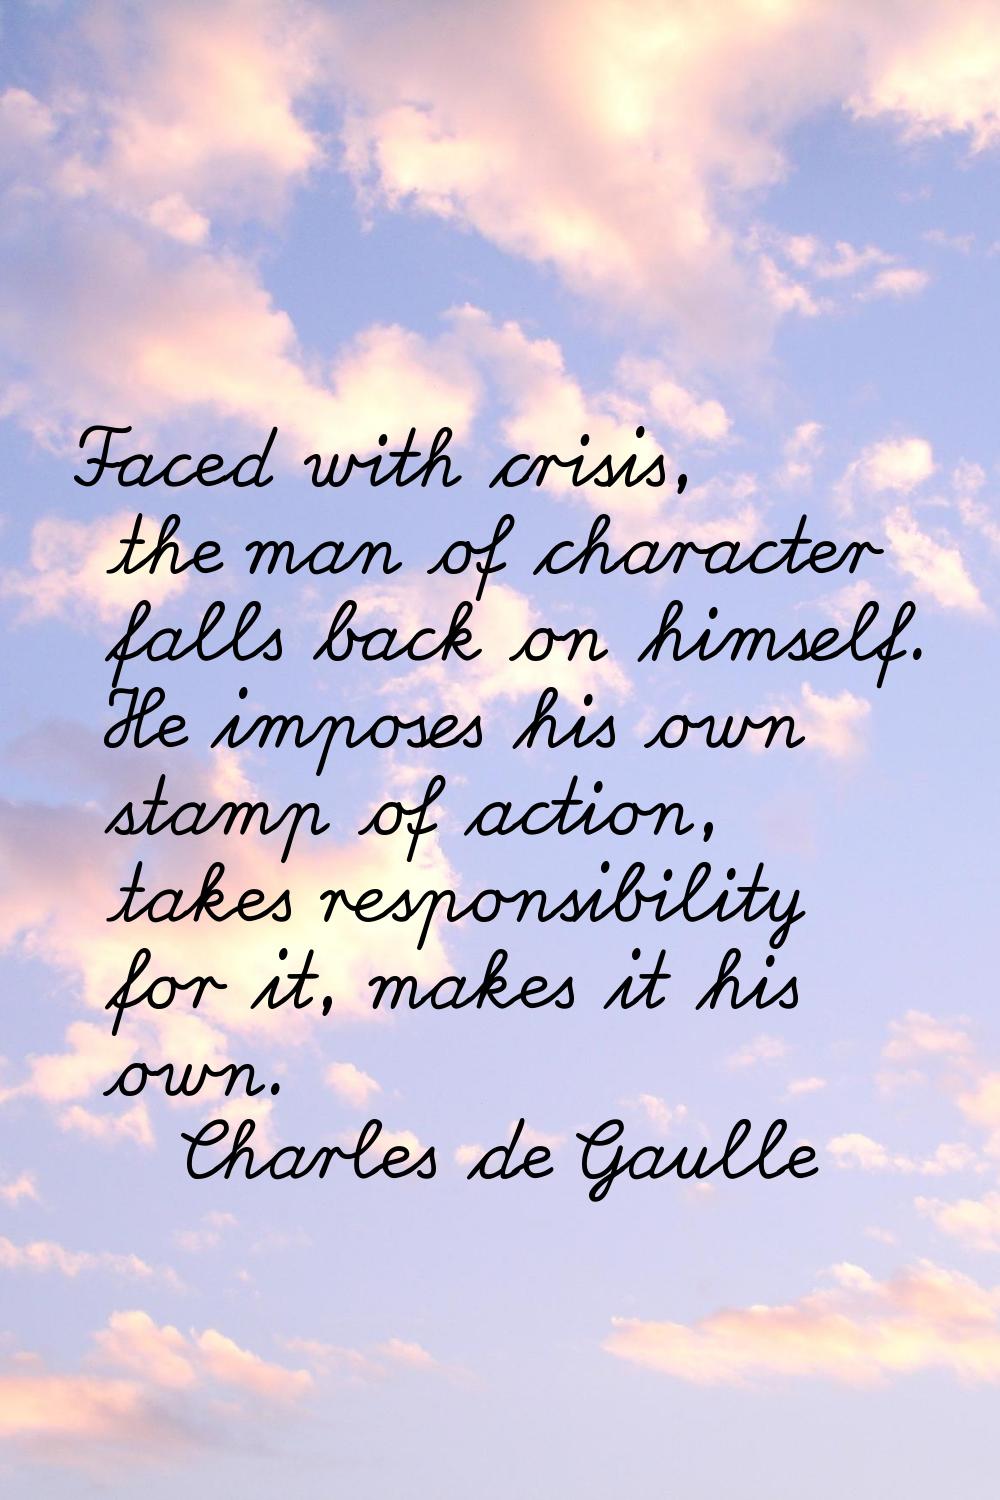 Faced with crisis, the man of character falls back on himself. He imposes his own stamp of action, 